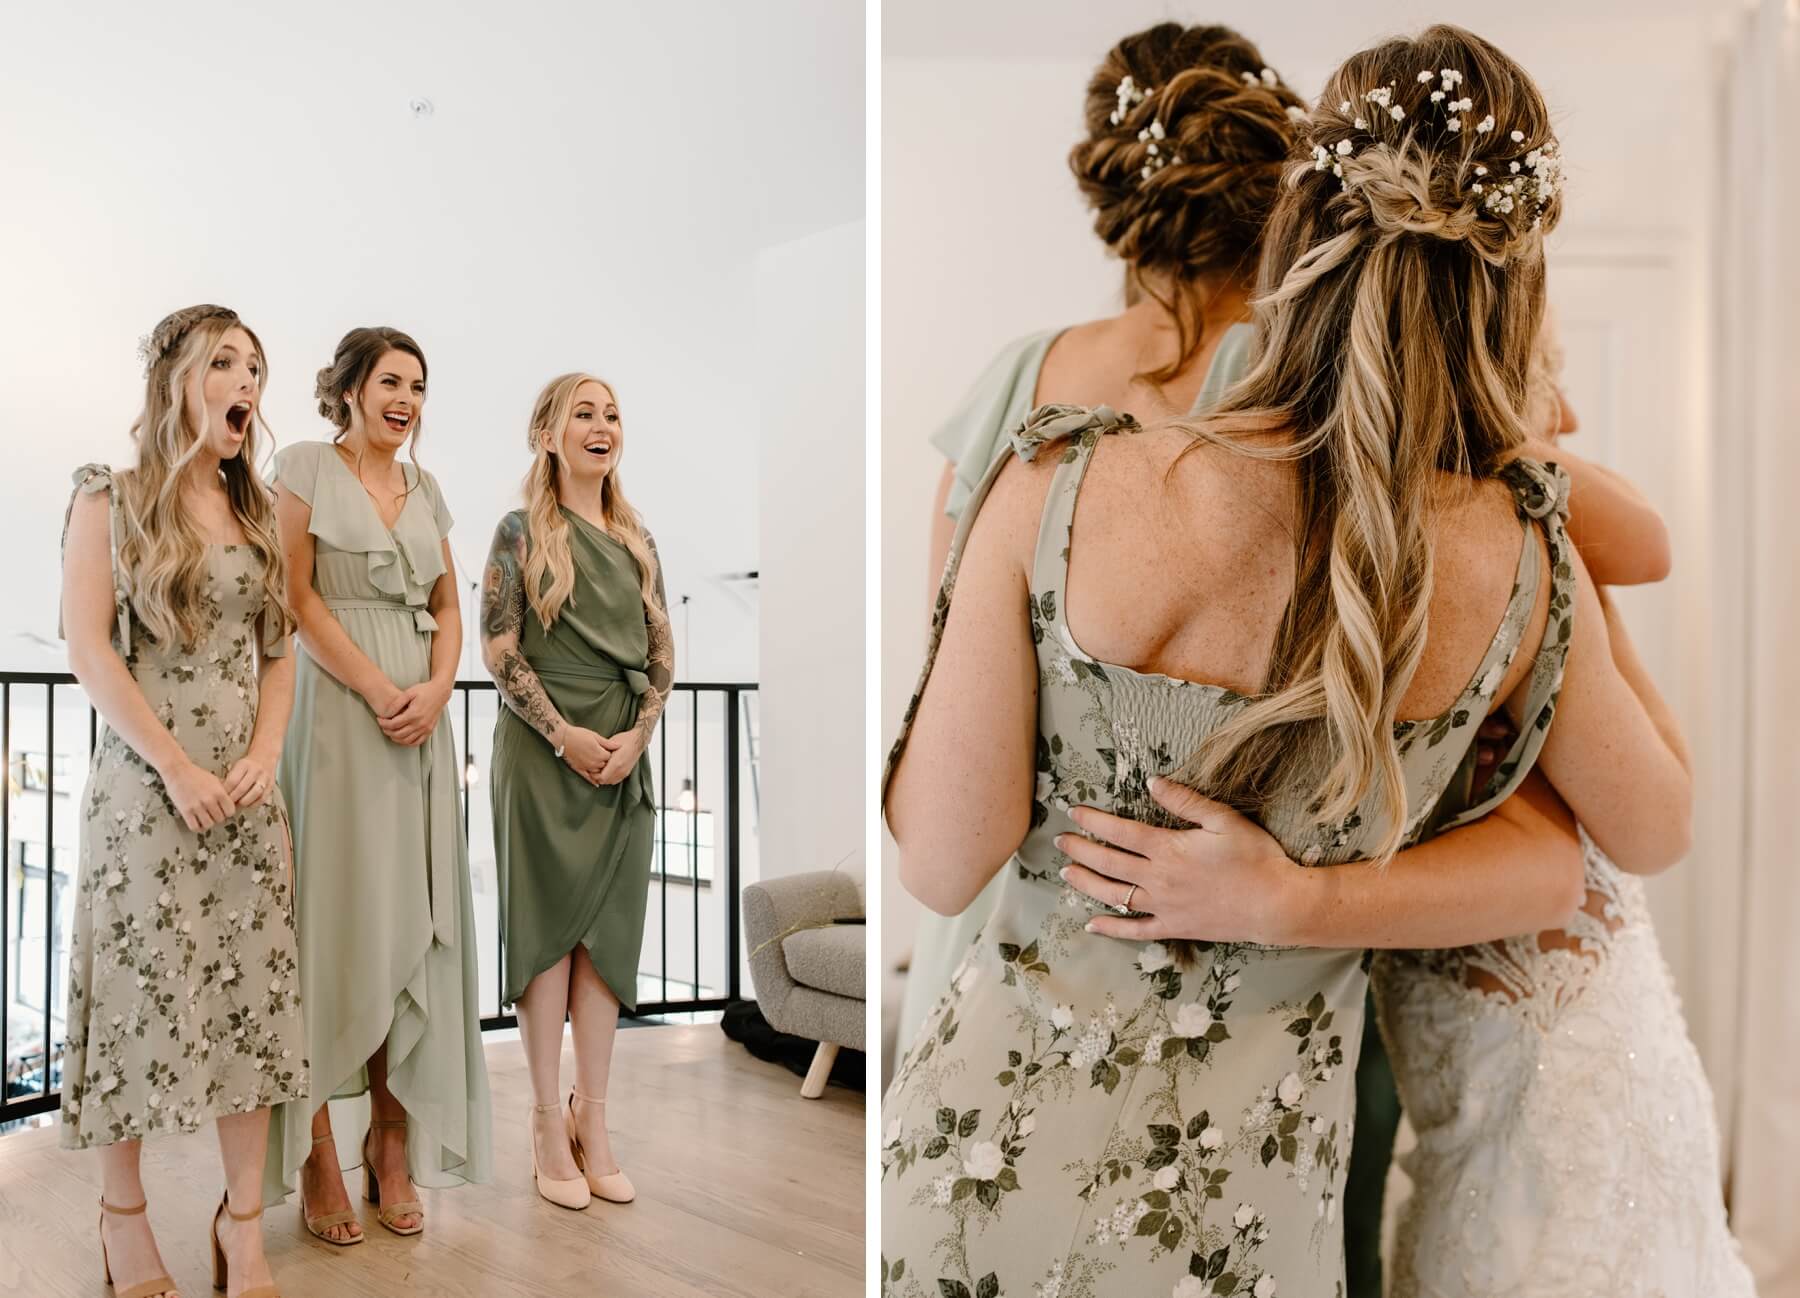 Bridesmaids reacting to seeing bride in her dress | bride hugging bridesmaids before ceremony | McArthur Weddings and Events